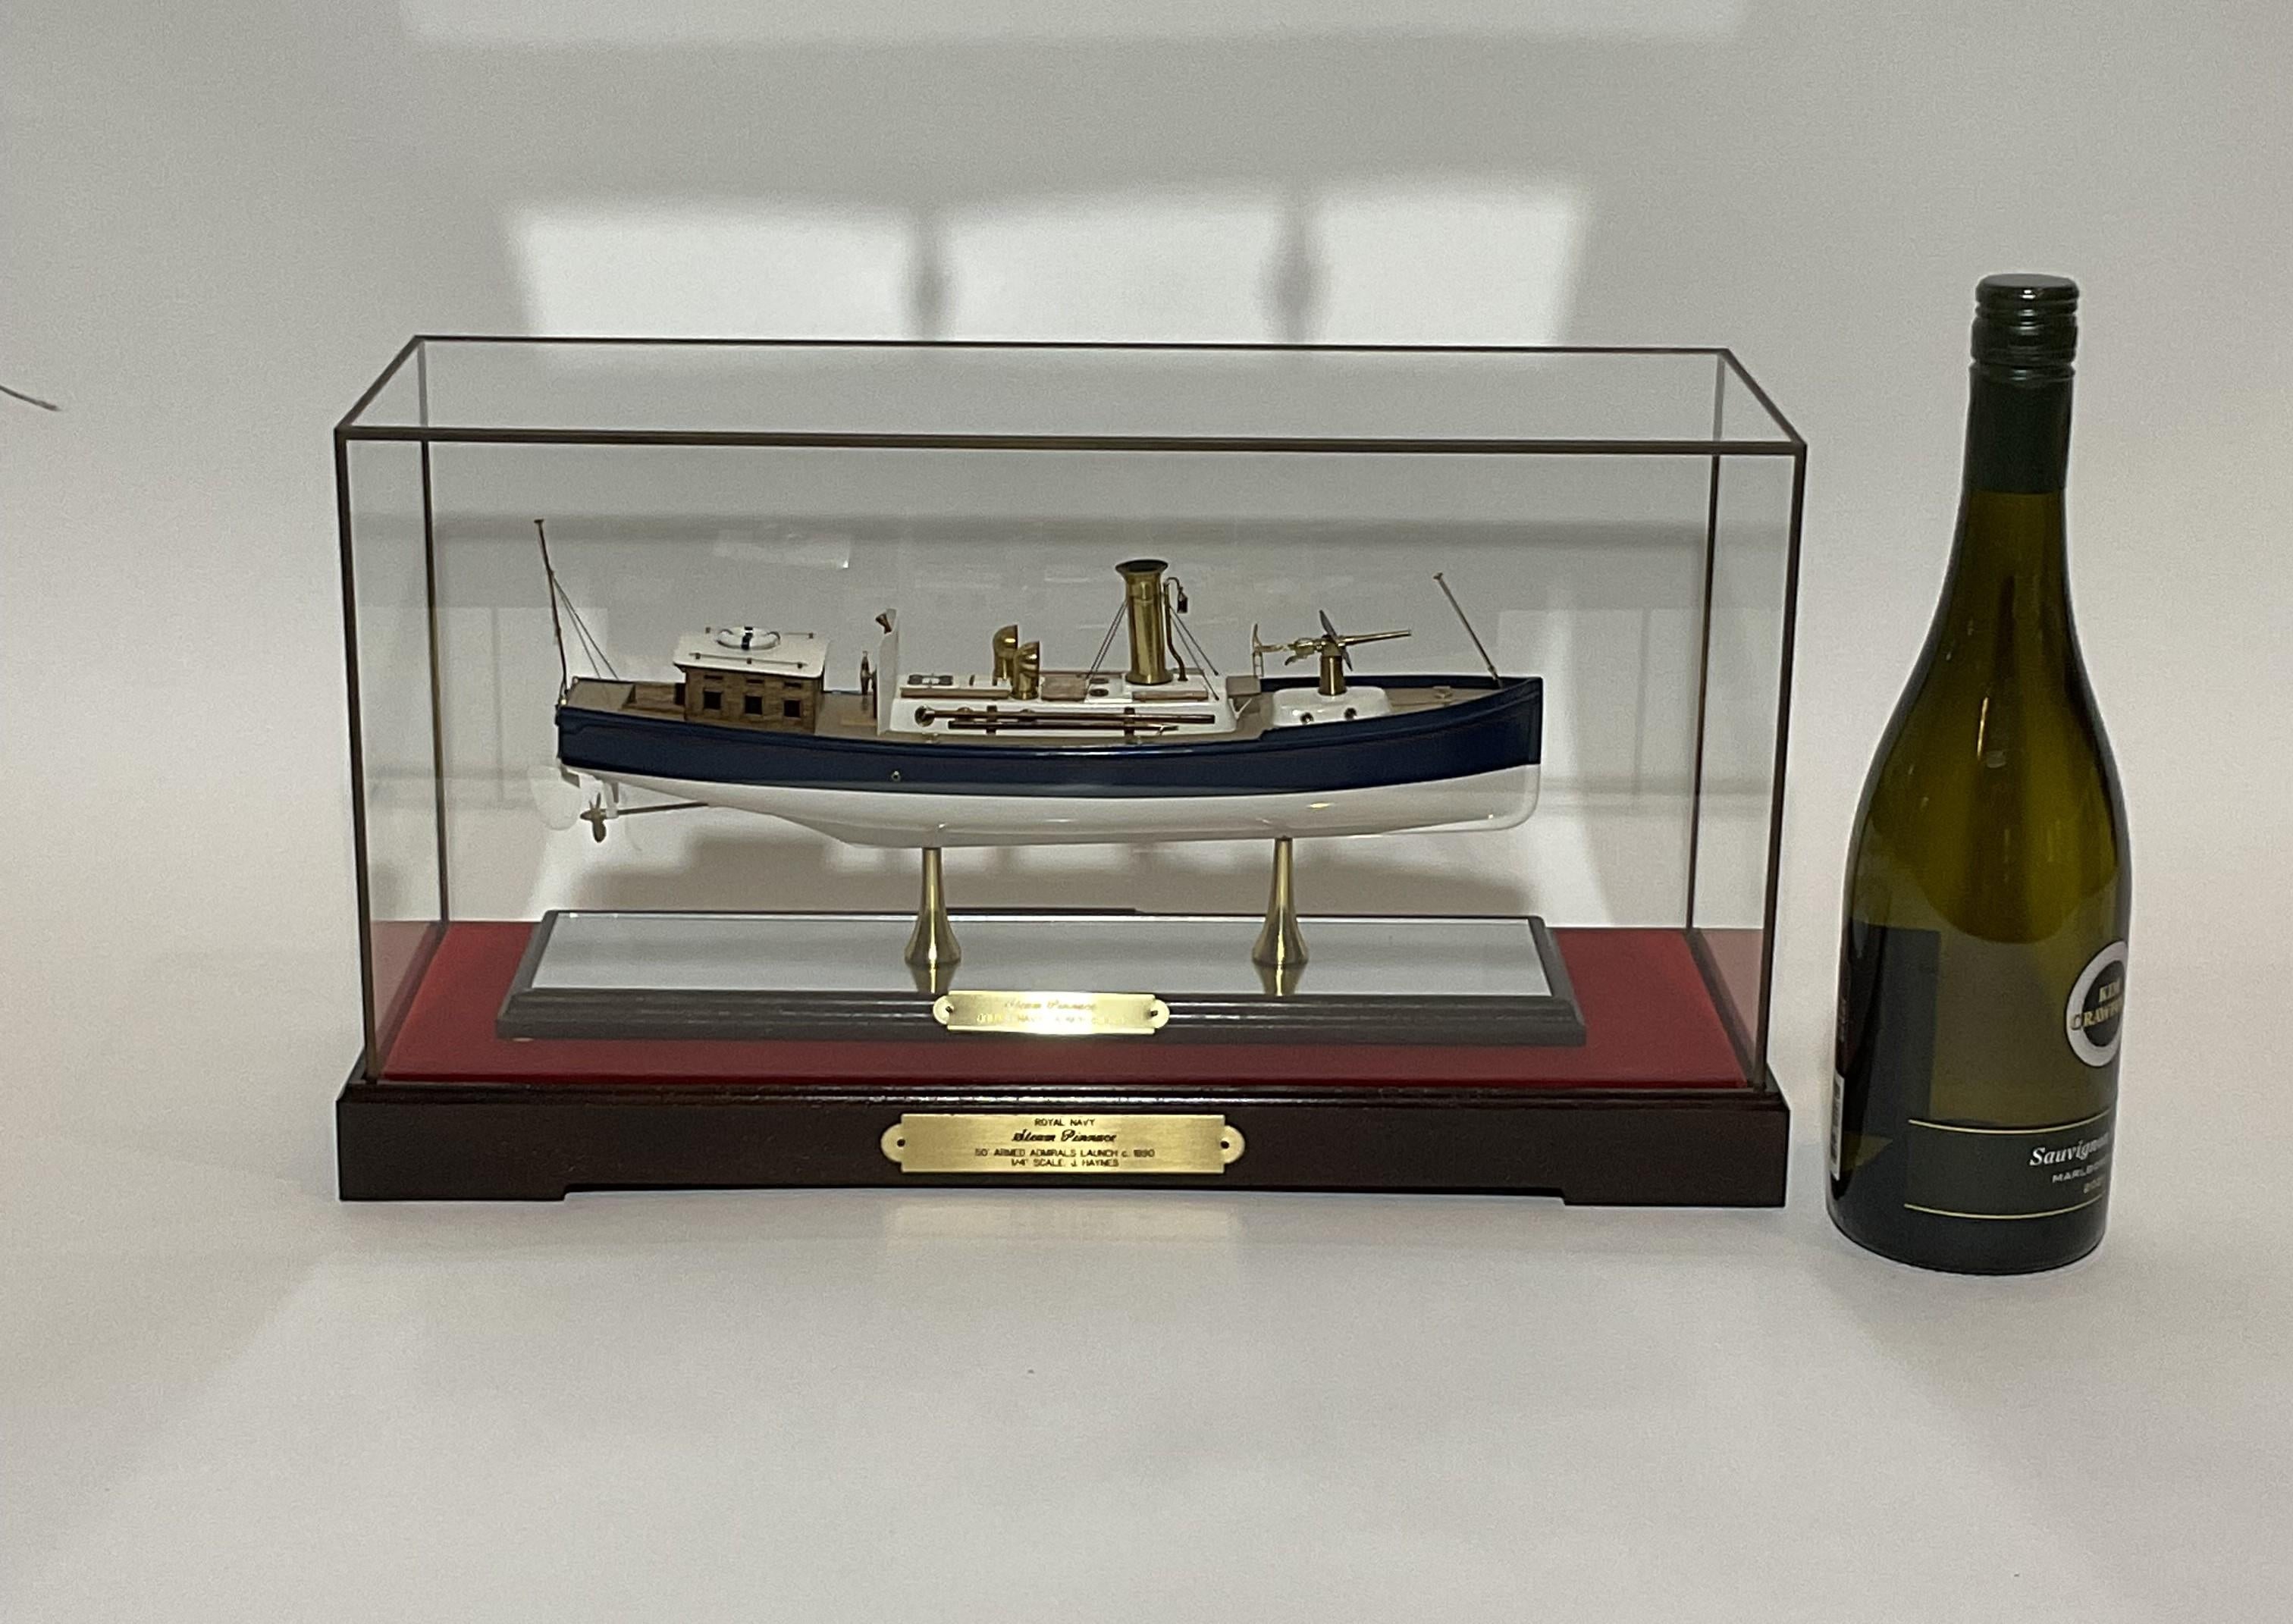 Fine scale model of a British Navy Admirals Launch by accomplished model maker John Haynes. Crisply detailed with basswood deck, brass fittings, cabin, deck gun, masts, lifering, ventilator cowls, etc.. Mounted on a mirrored base and felt lined